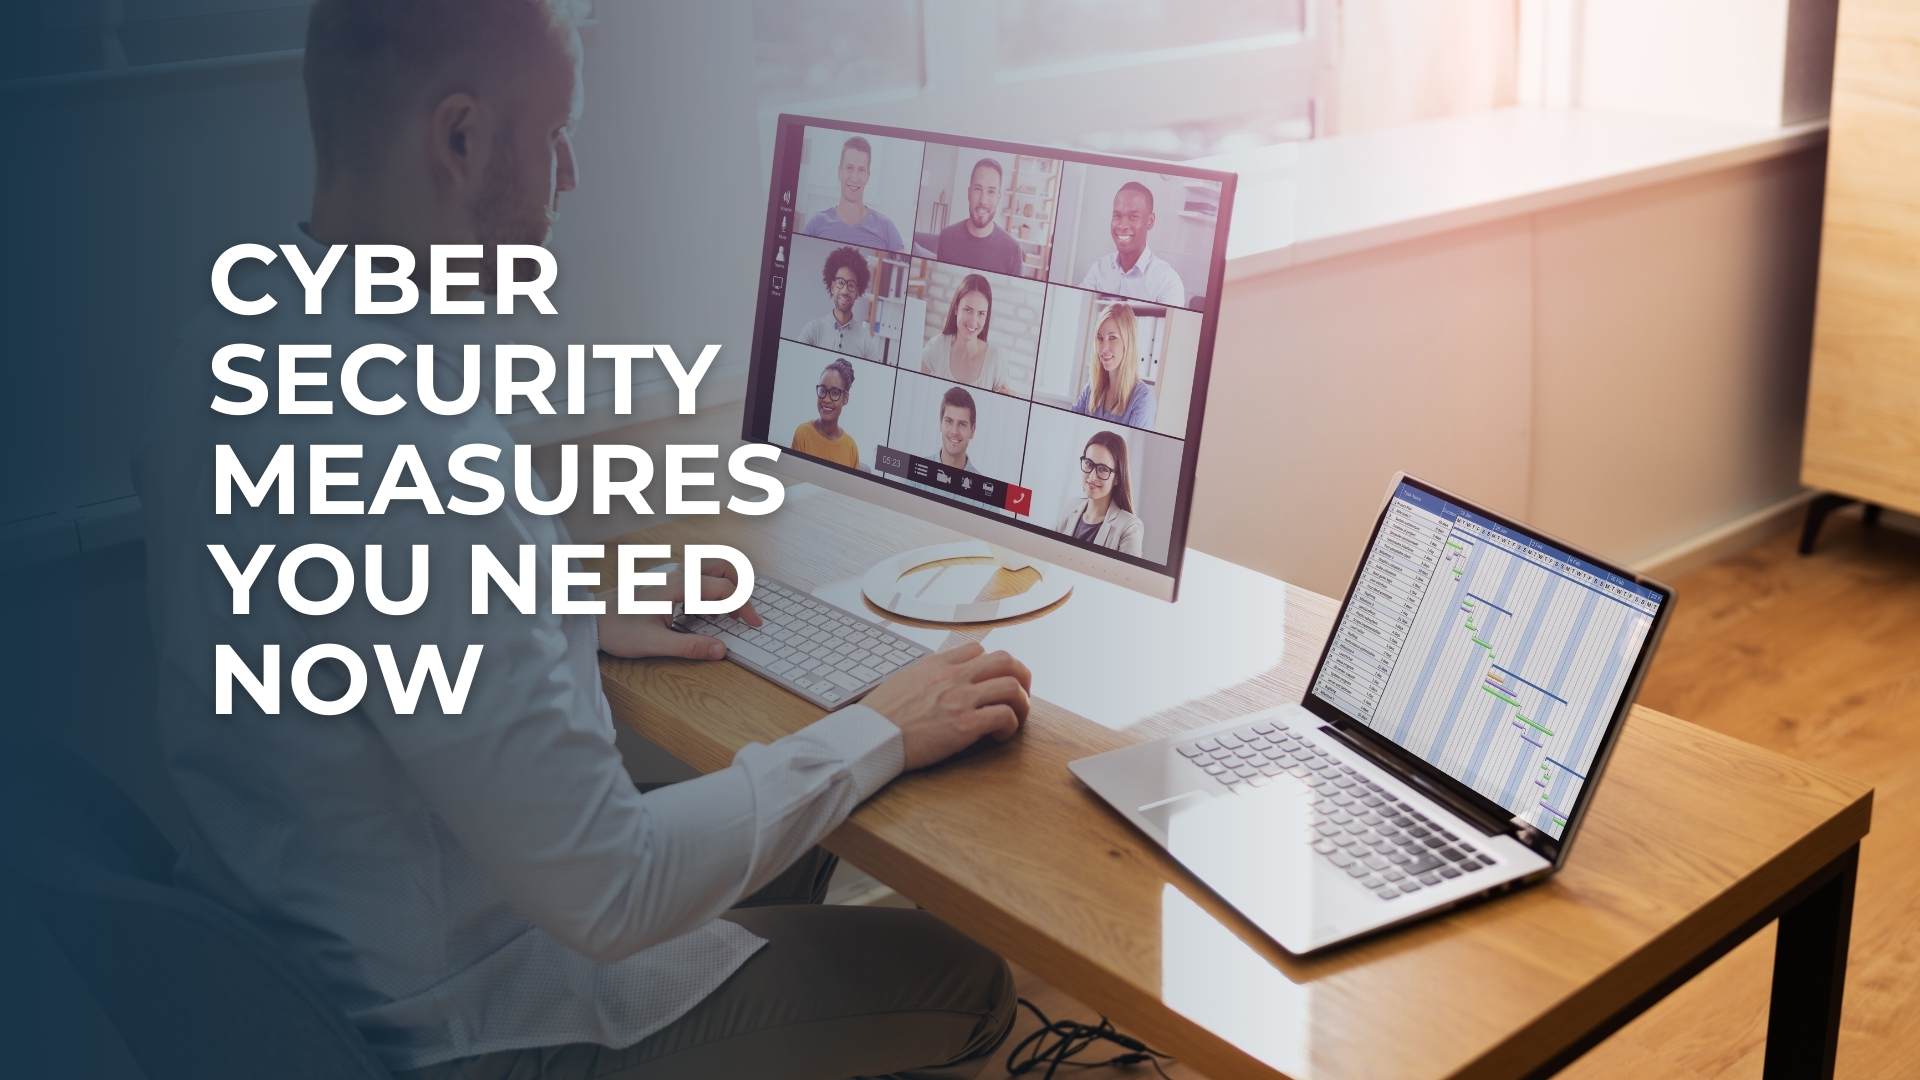 Cyber Security Measures You Need Now